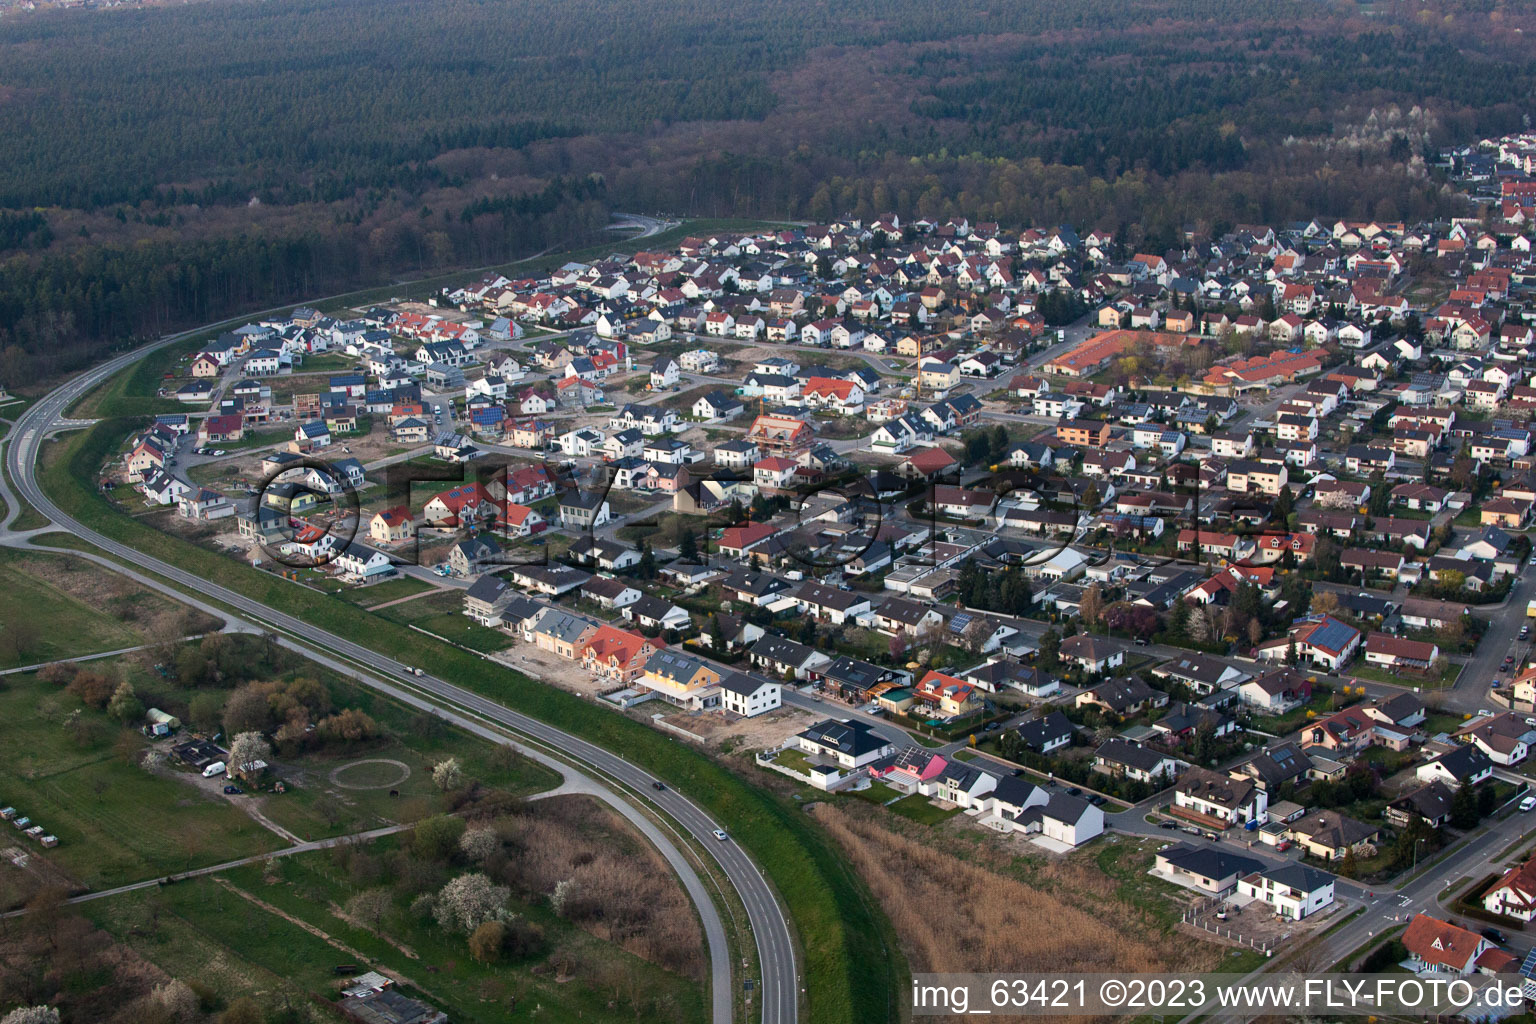 Jockgrim in the state Rhineland-Palatinate, Germany seen from a drone